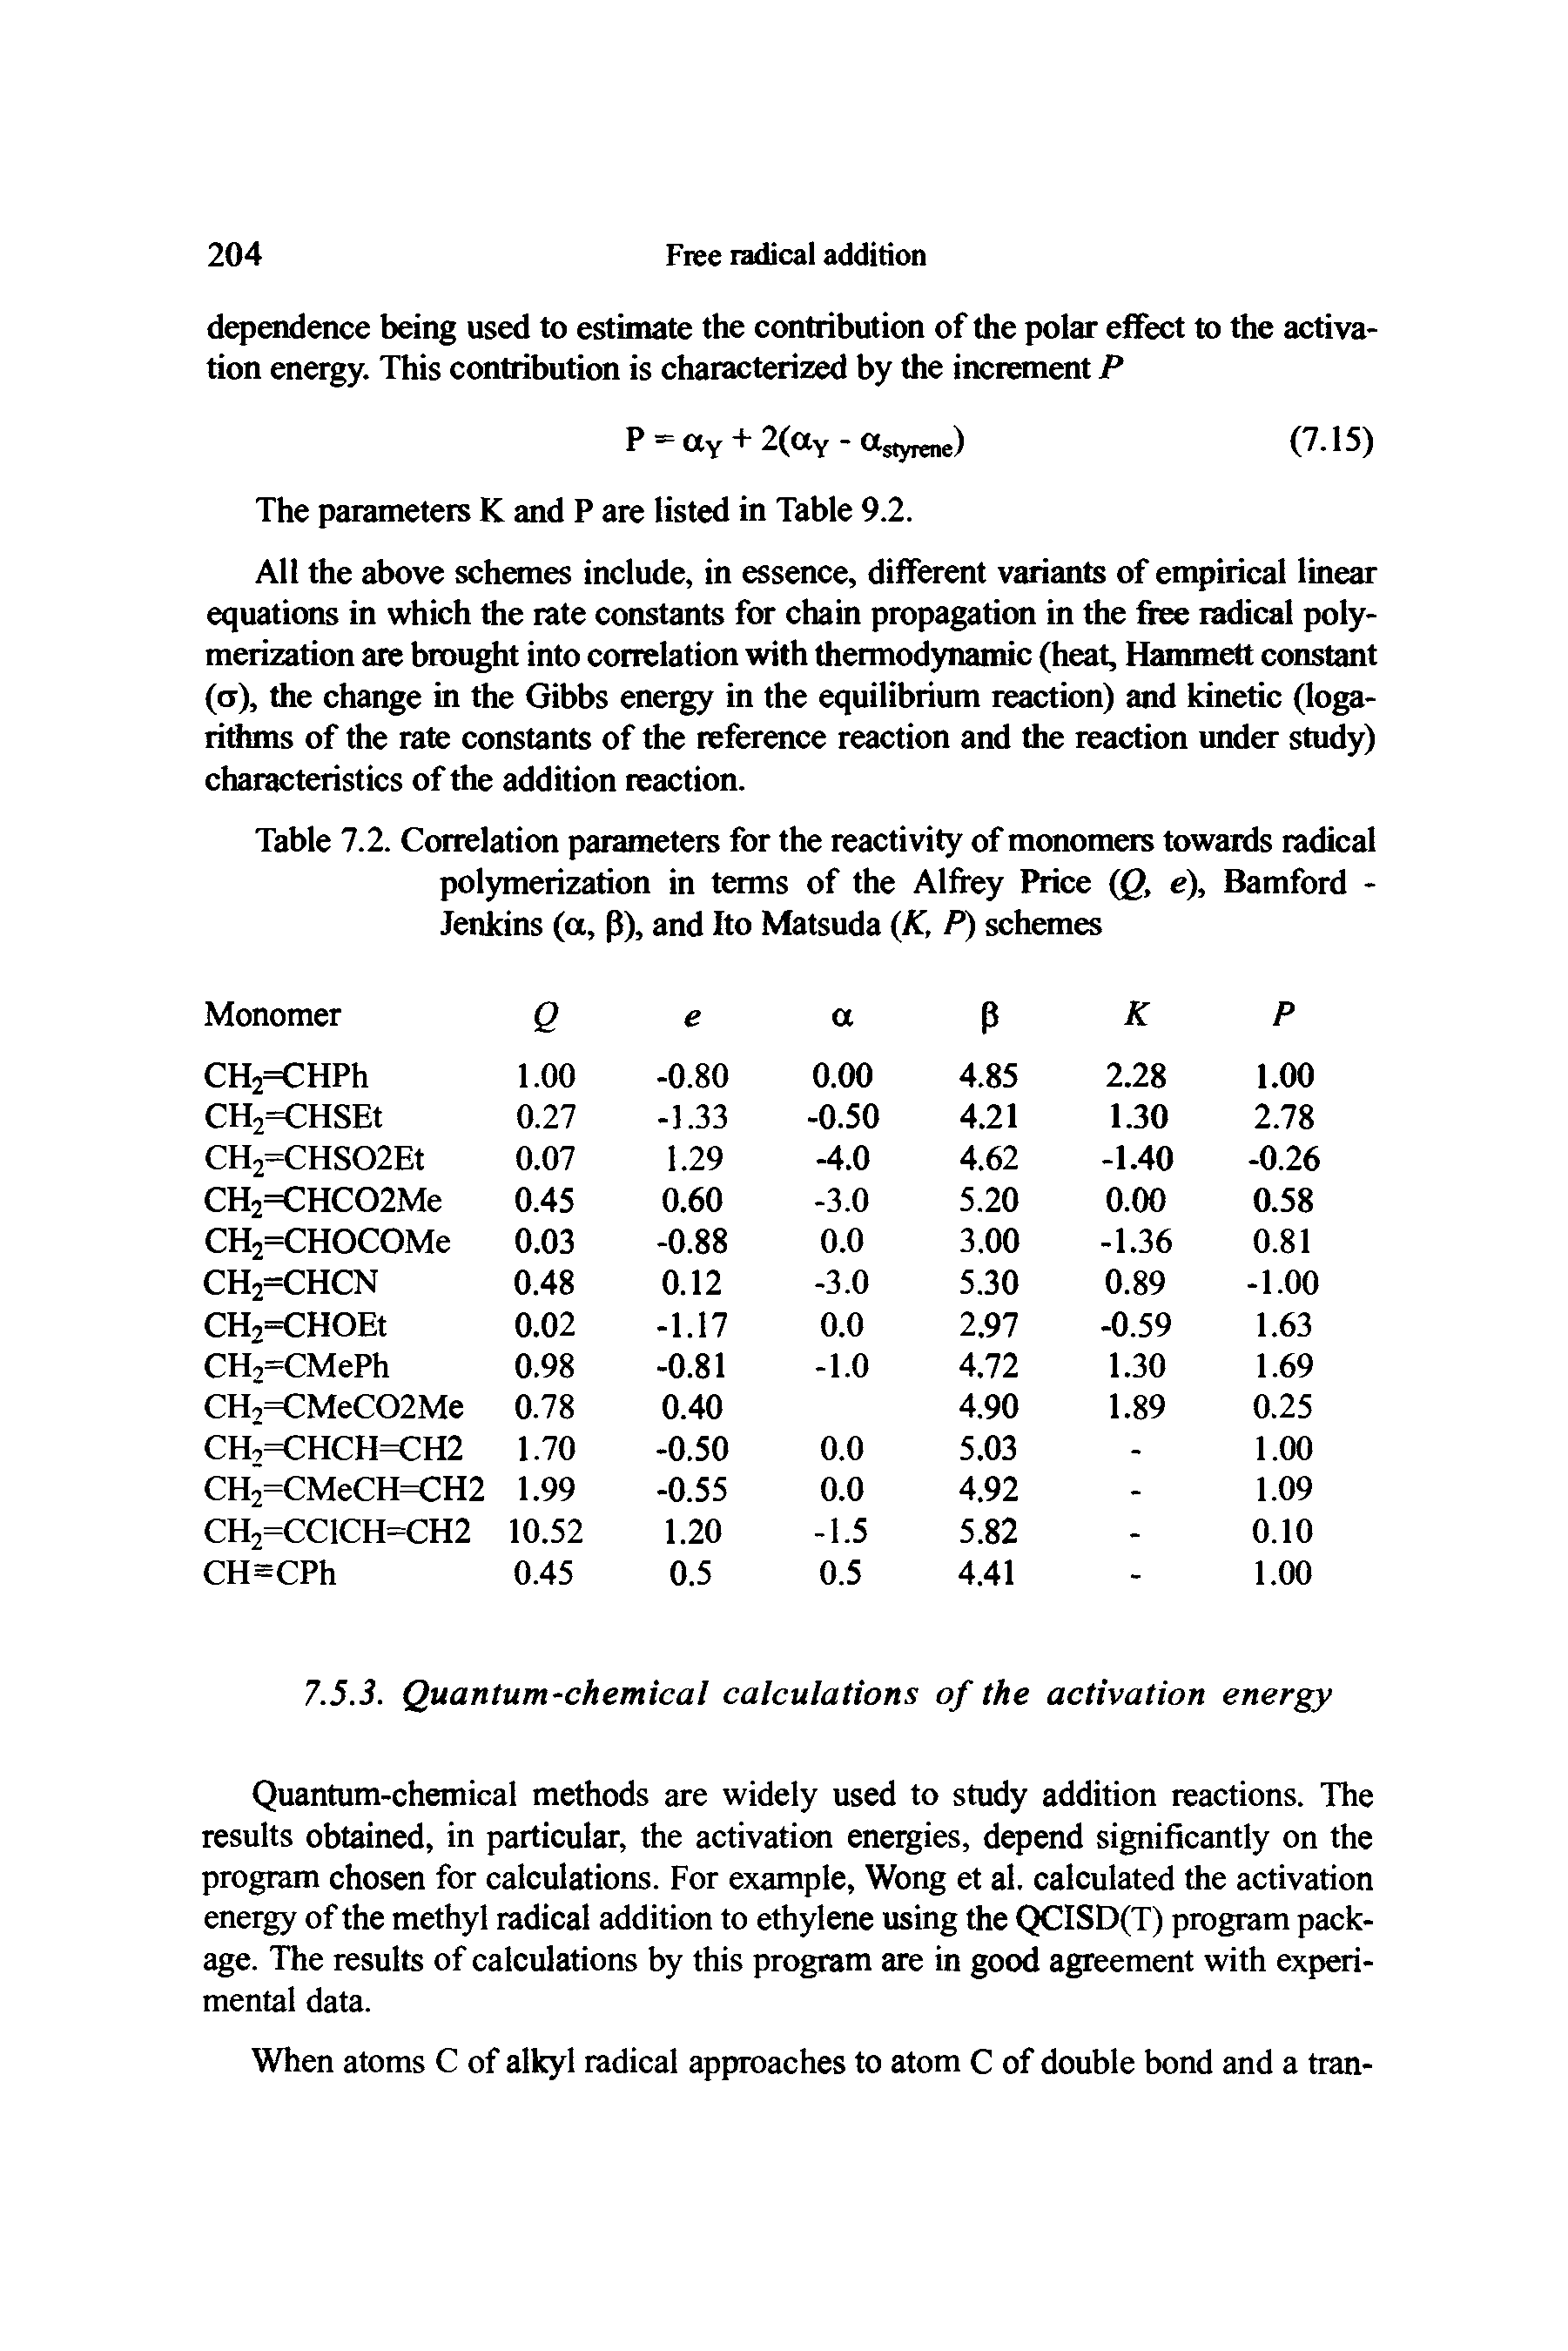 Table 7.2. Correlation parameters for the reactivity of monomers towards radical polymerization in terms of the Alfrey Price (Q, e), Bamford -Jenkins (a, P), and Ito hfetsuda (AT, P) schemes...